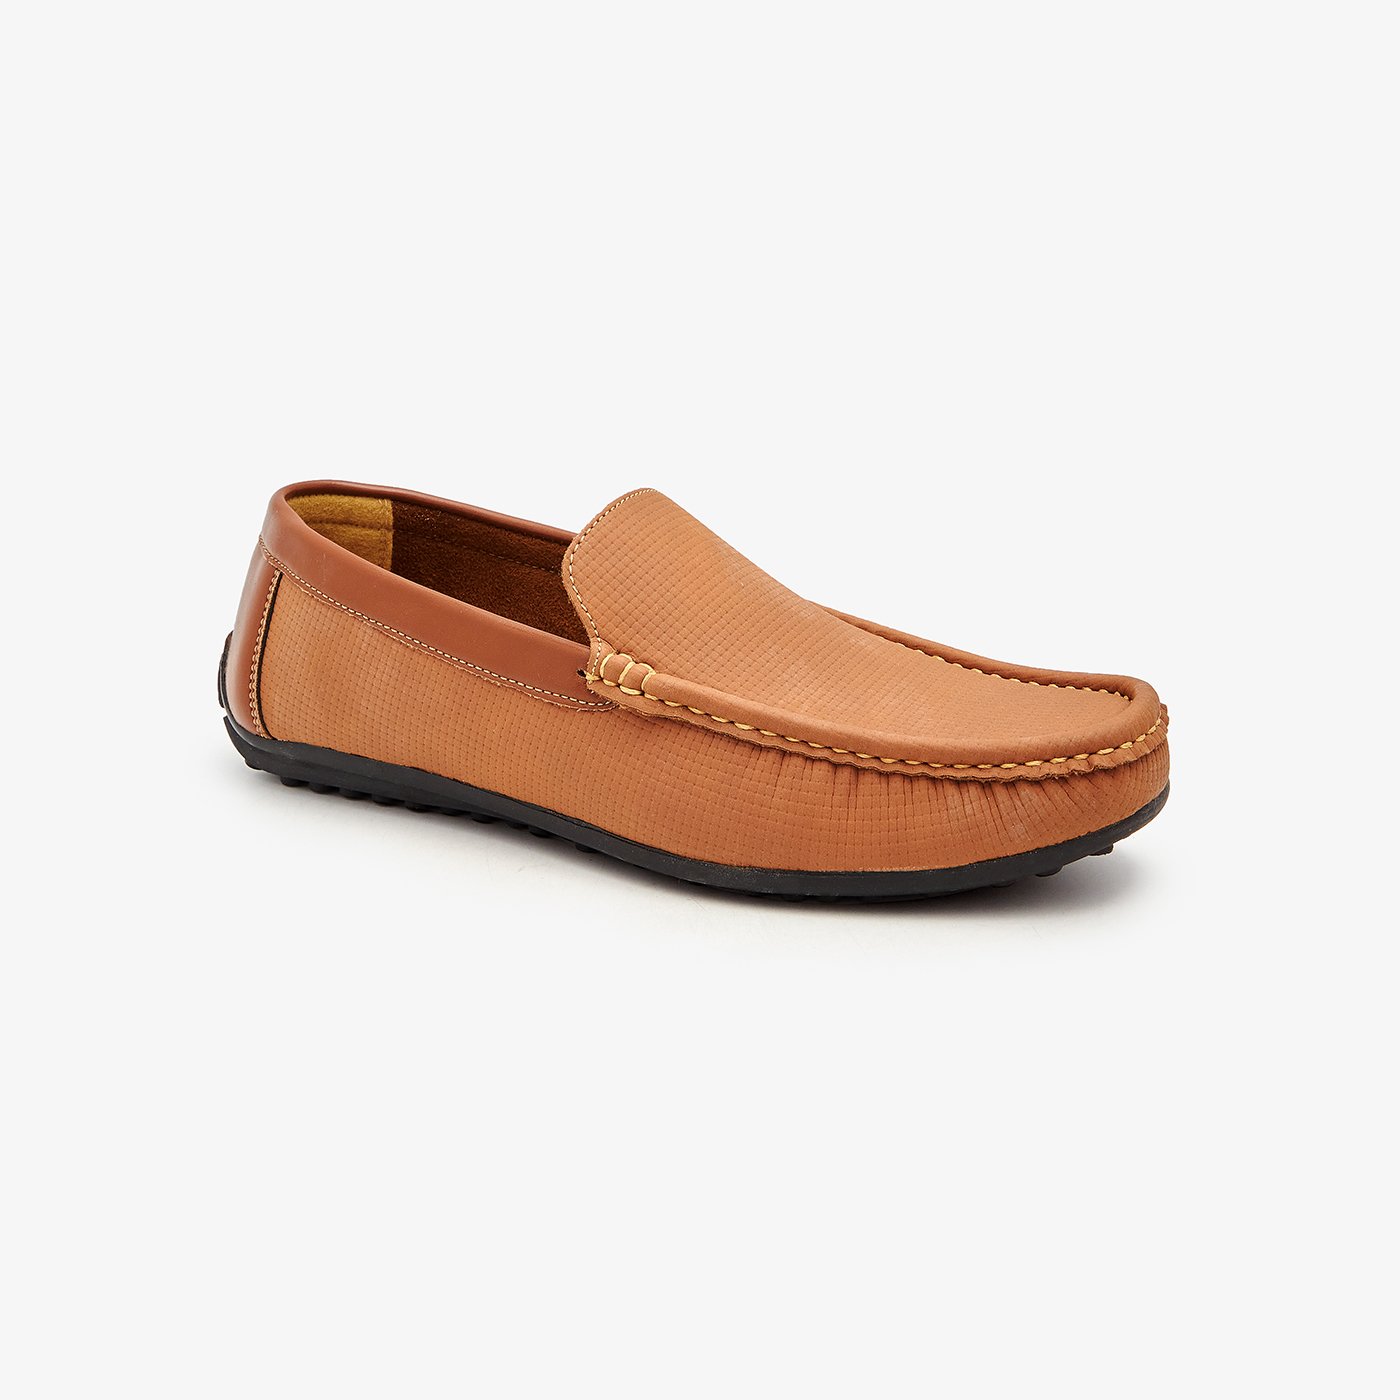 Everyday Loafers for Men